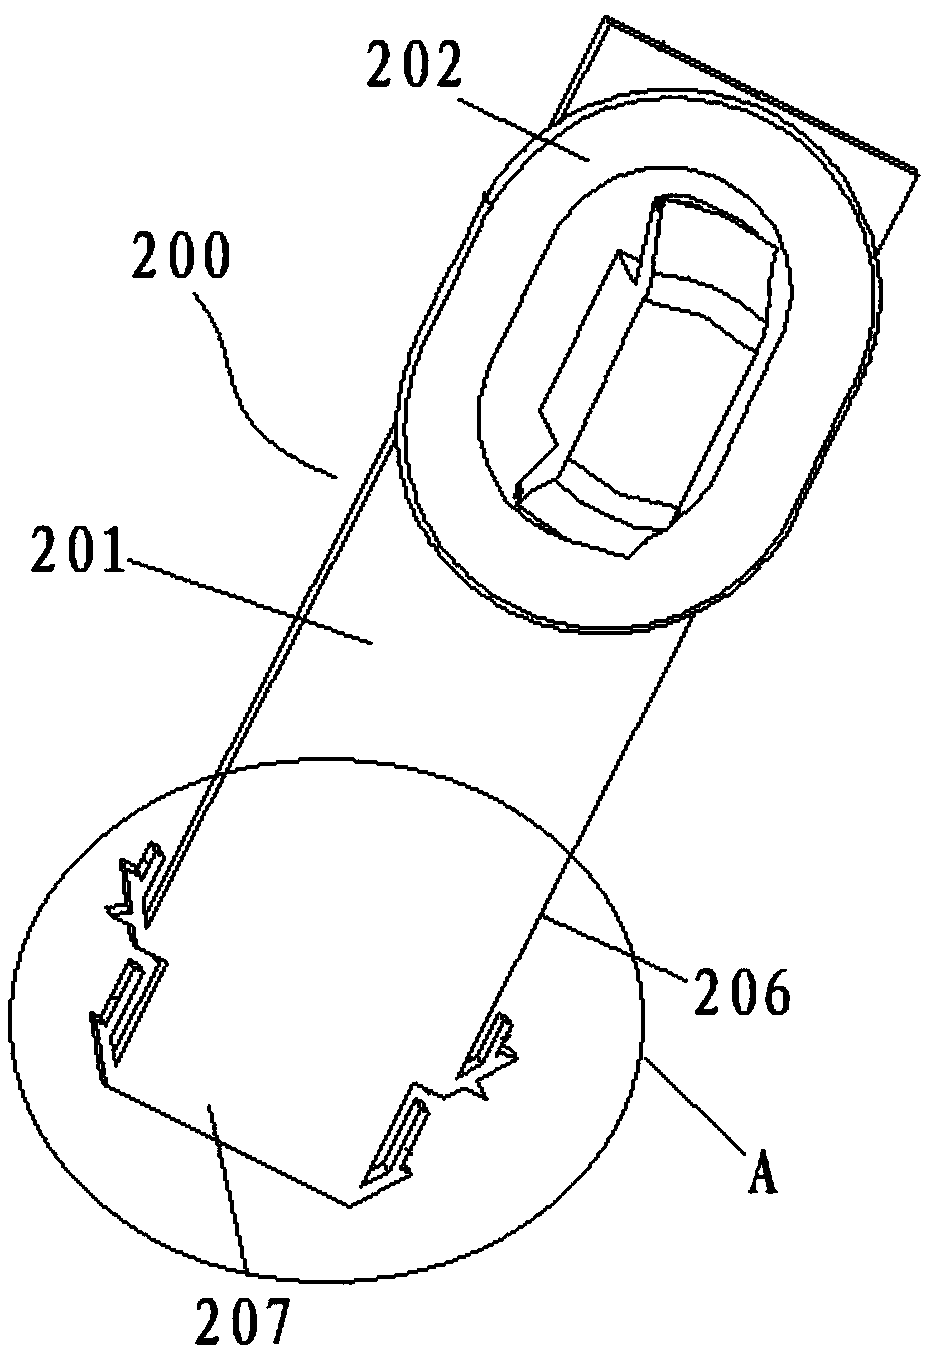 Pipeline route fixing device